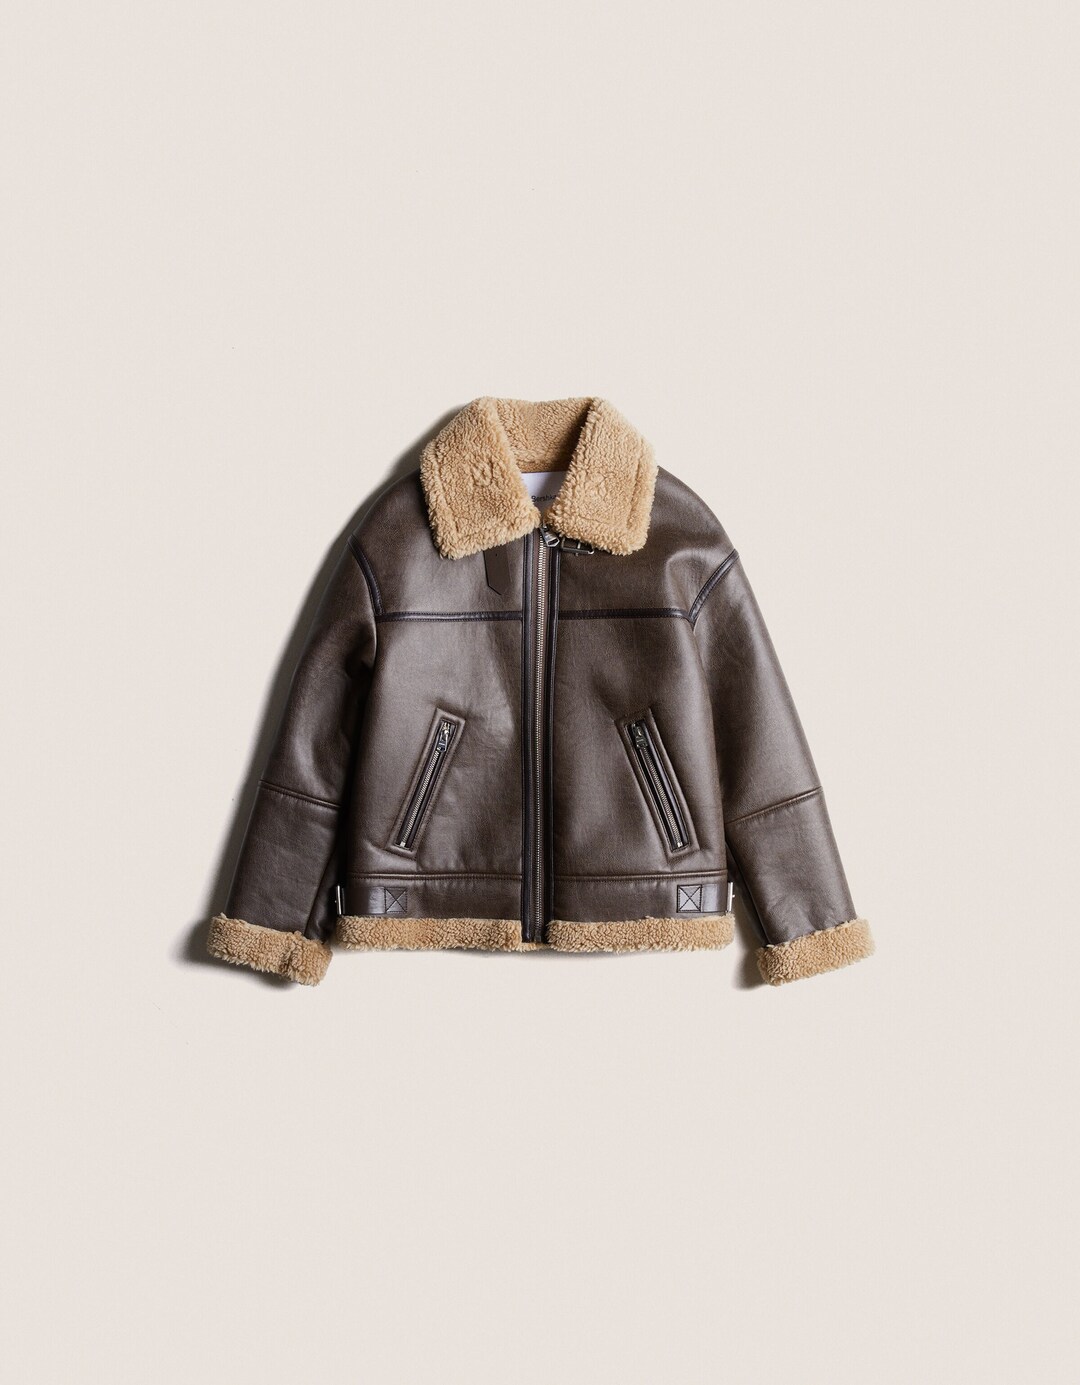 Faux leather double-faced jacket